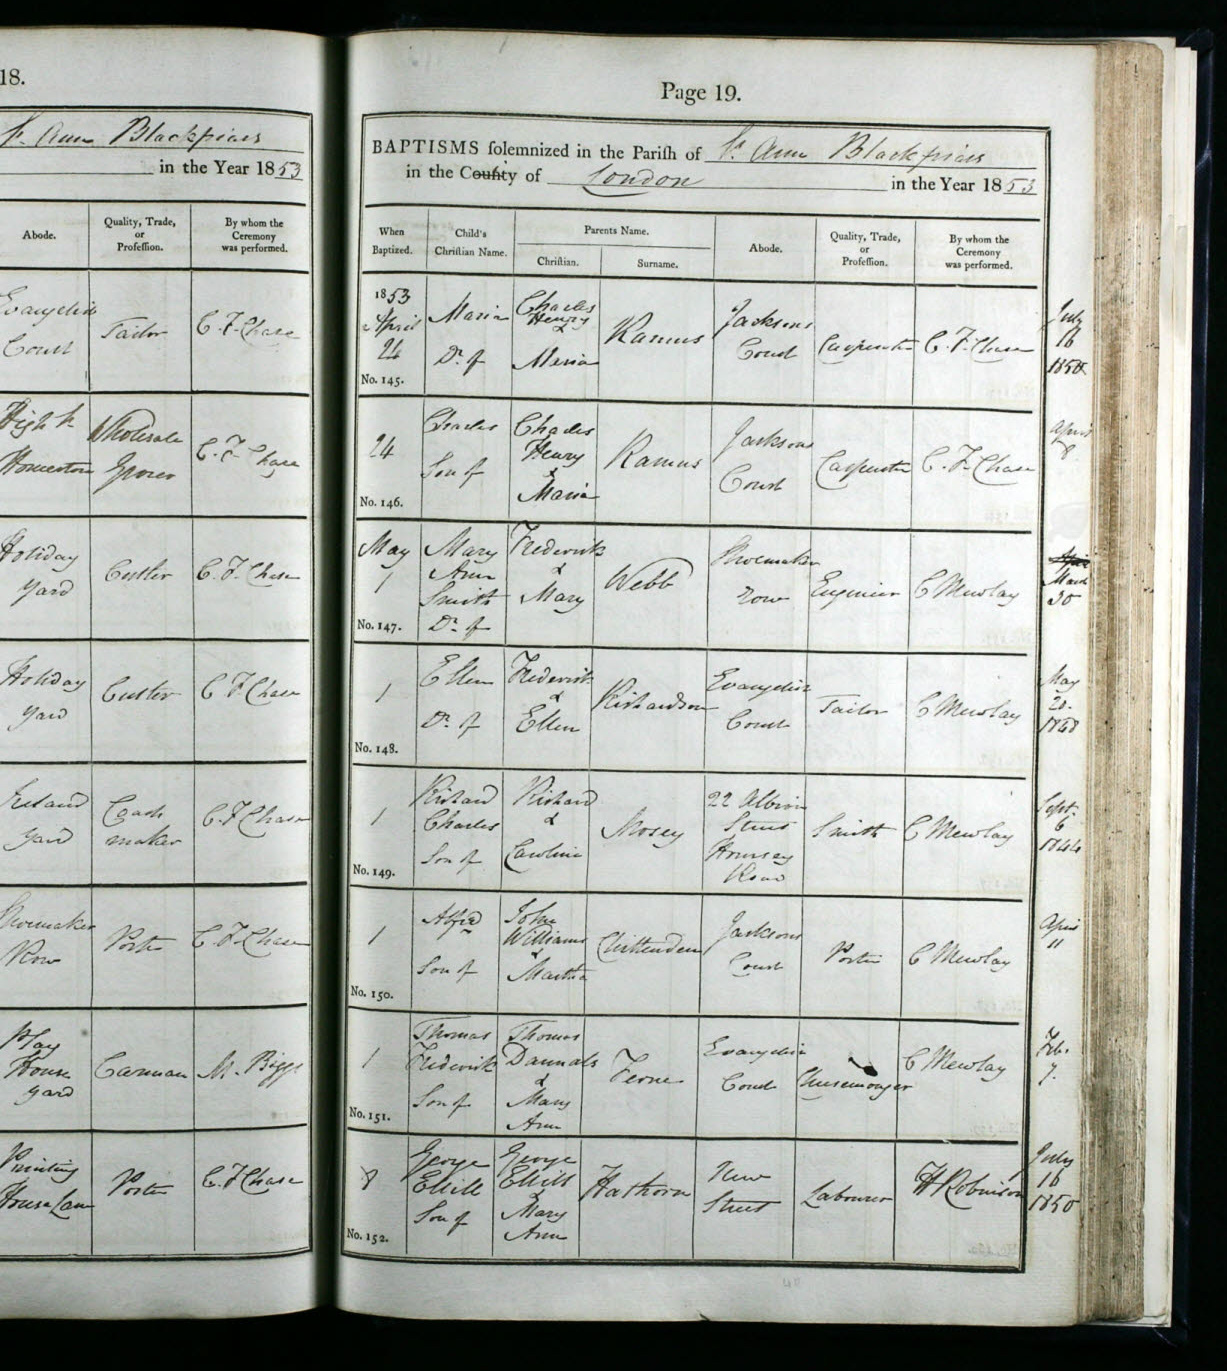 1853 baptism, Mary Ann Smith Webb. There were two Mary Ann Webb births in same area in 1853. However, parents on this seem to match with name and profession.